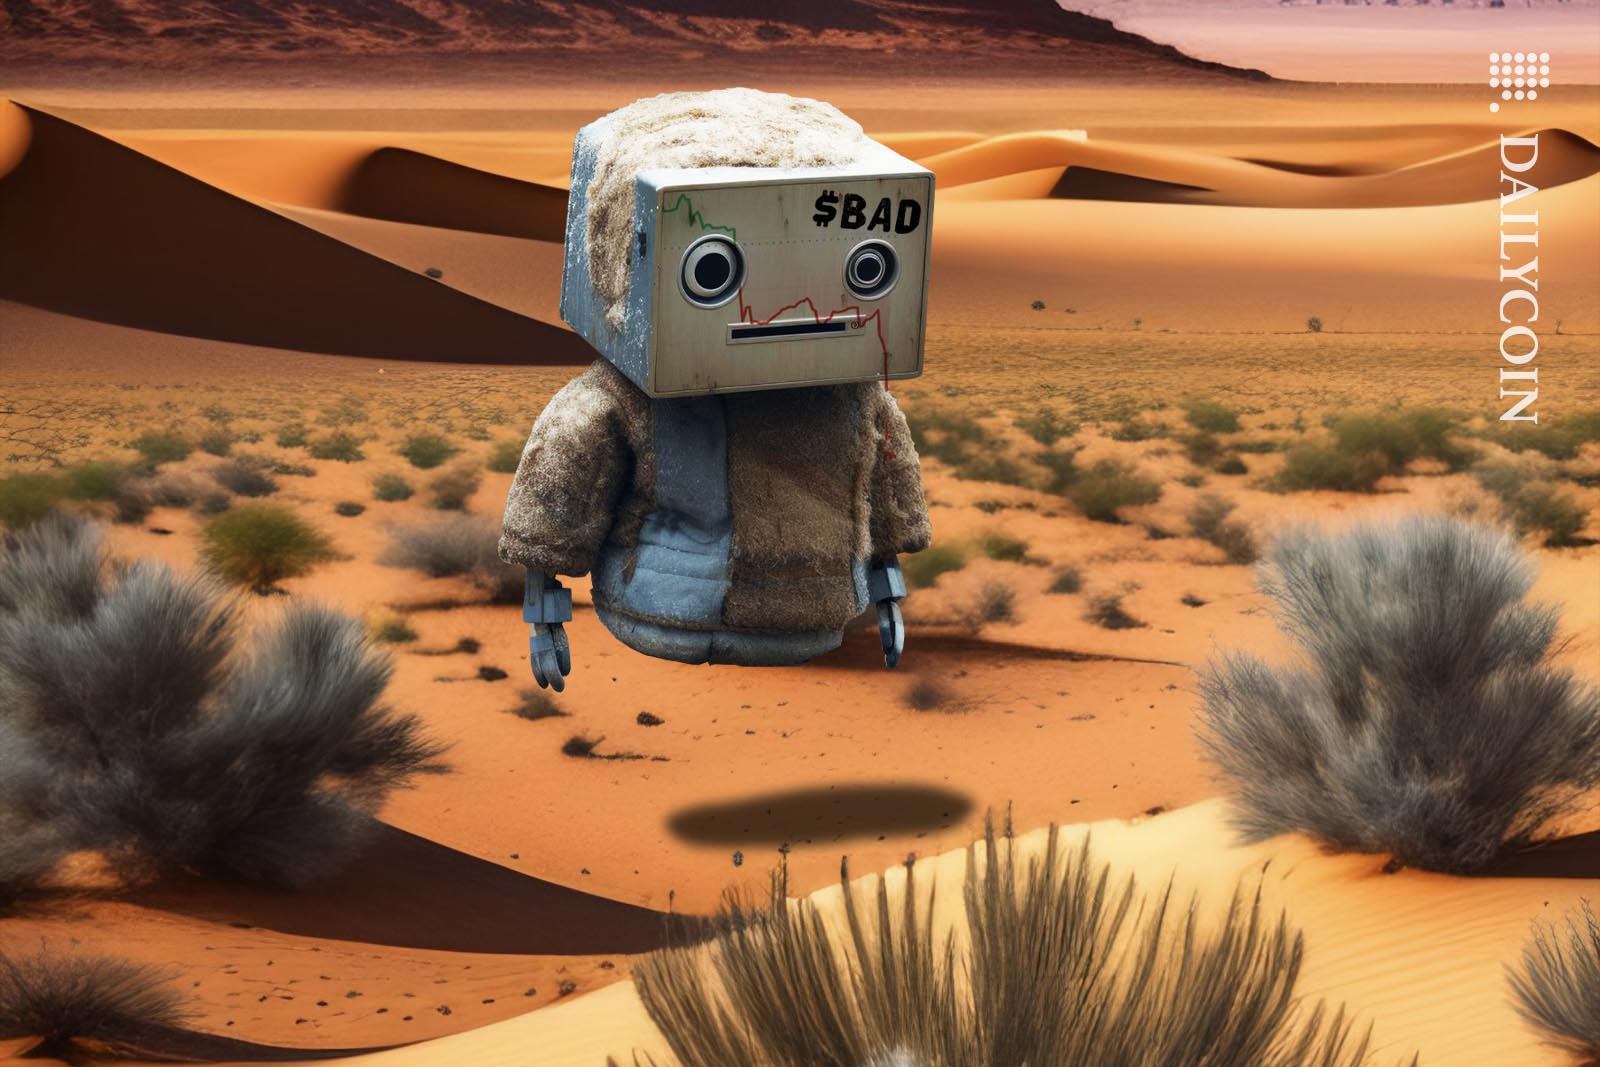 Sad little robot in a desert dripping blood from it's negative red chart on its face.